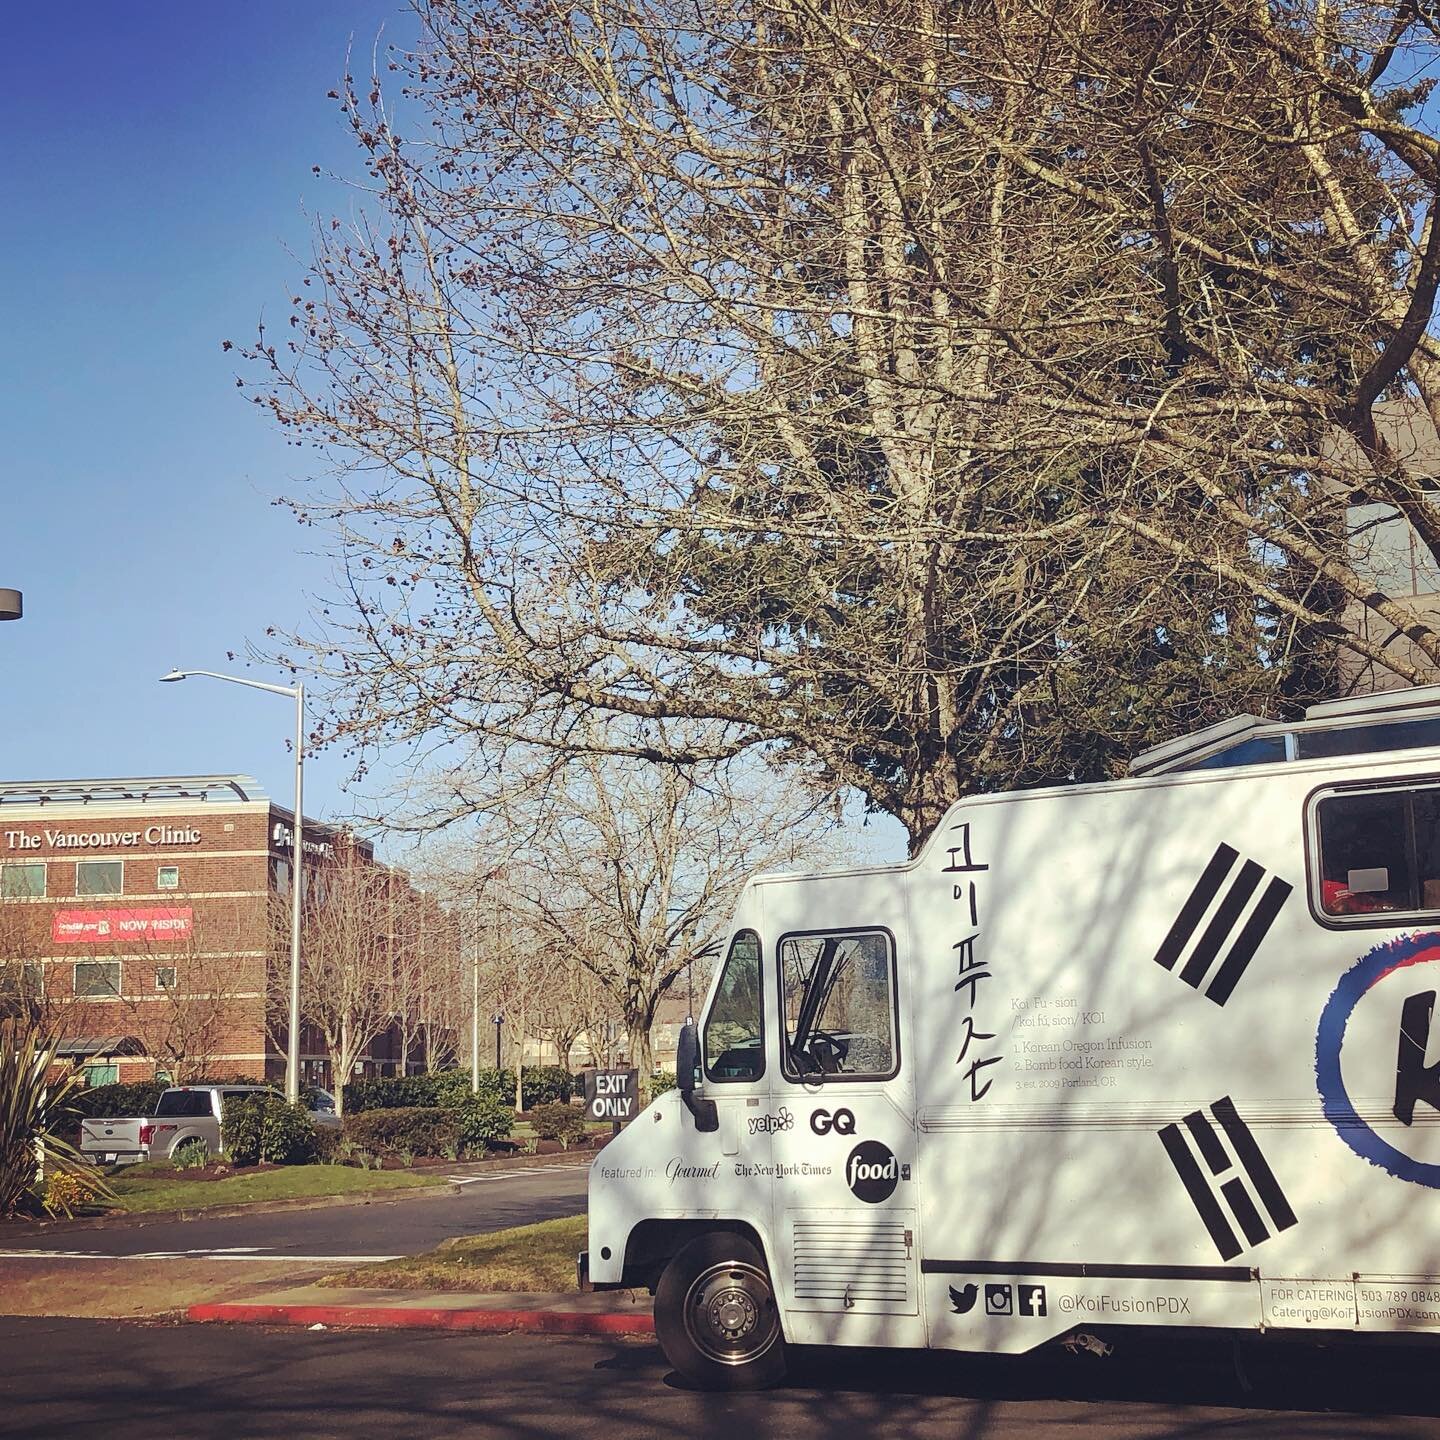 It&rsquo;s a wonderful day for probably a burrito....we out here slanging until 1:30pm. @peacehealthsouthwest 

505 NE 87th Ave
Vancouver, WA  98664

#peacehealth #thevancouverclinic #getsumkoi #washingtonstate